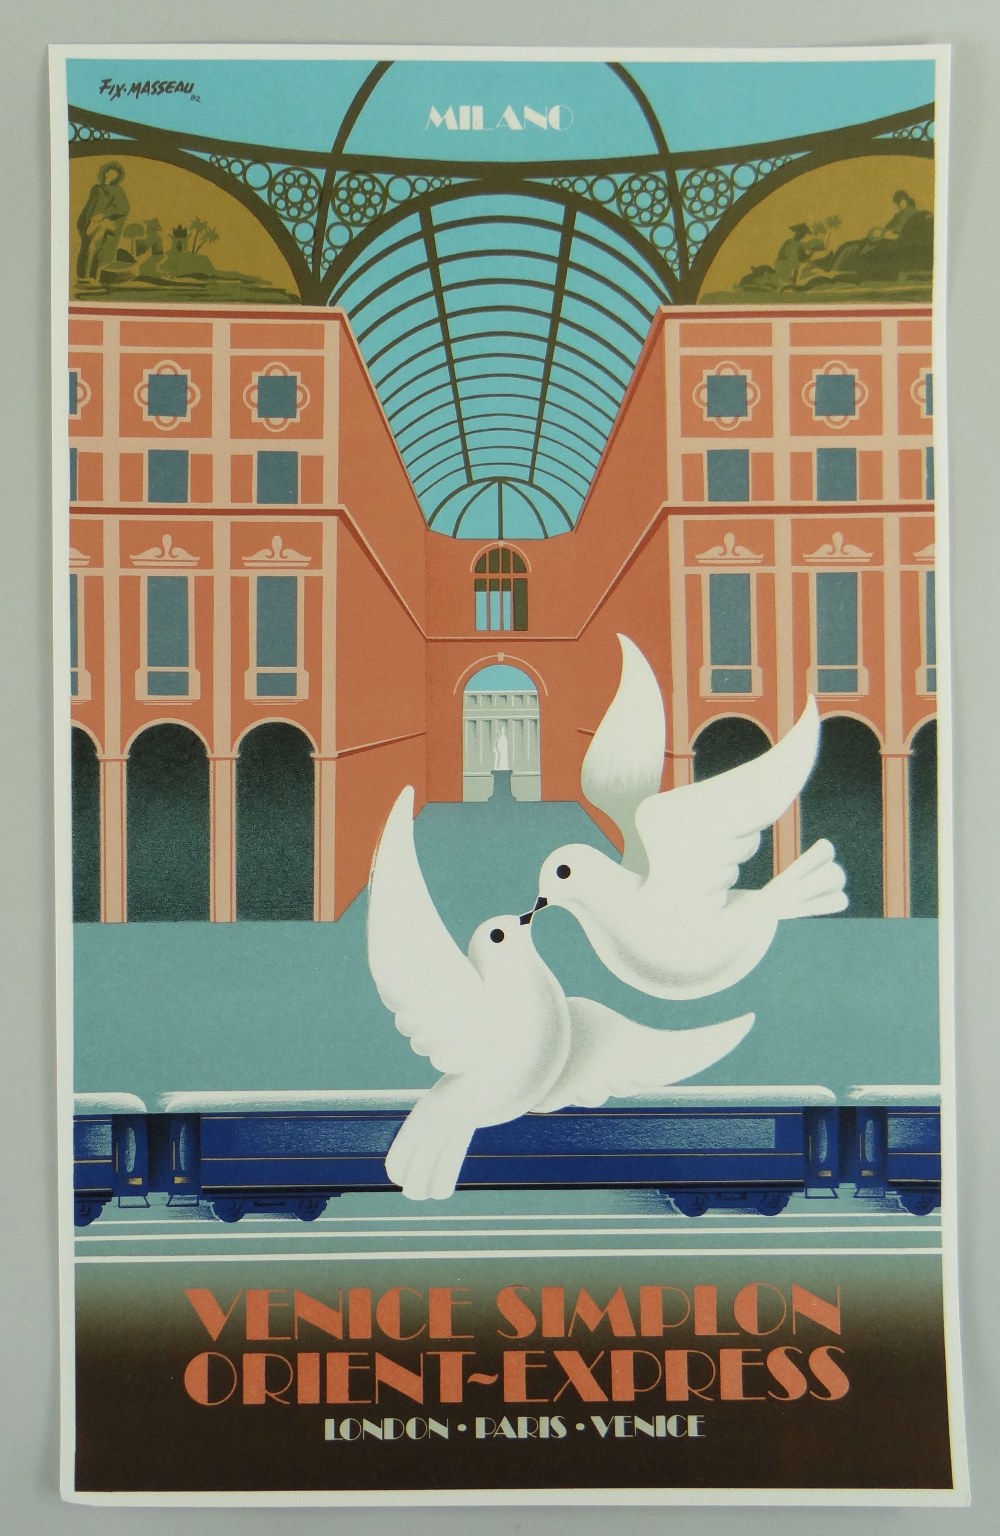 PIERRE FIX-MASSEAU fine boxed set of nine limited edition (337/500) coloured lithographs - Venice - Image 8 of 12